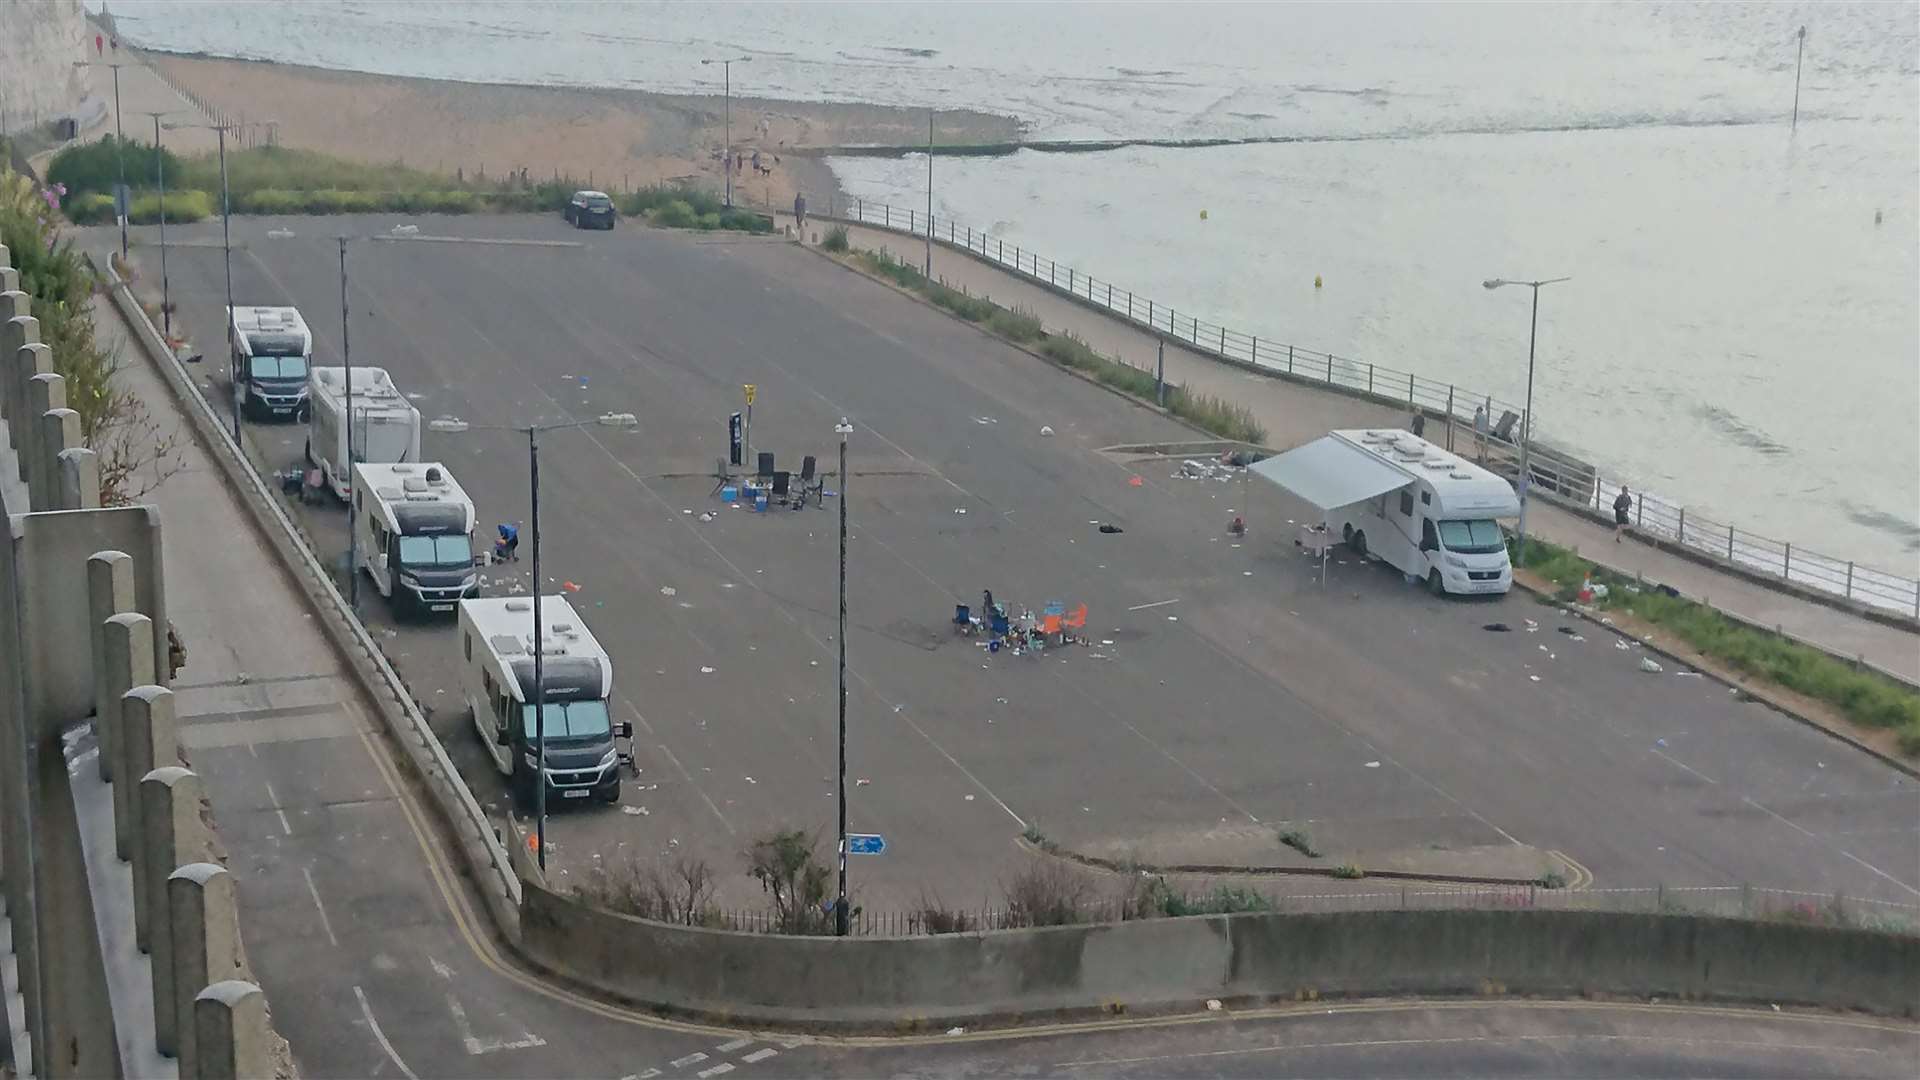 Litter has been left across the car park. Pic: Andy Smith